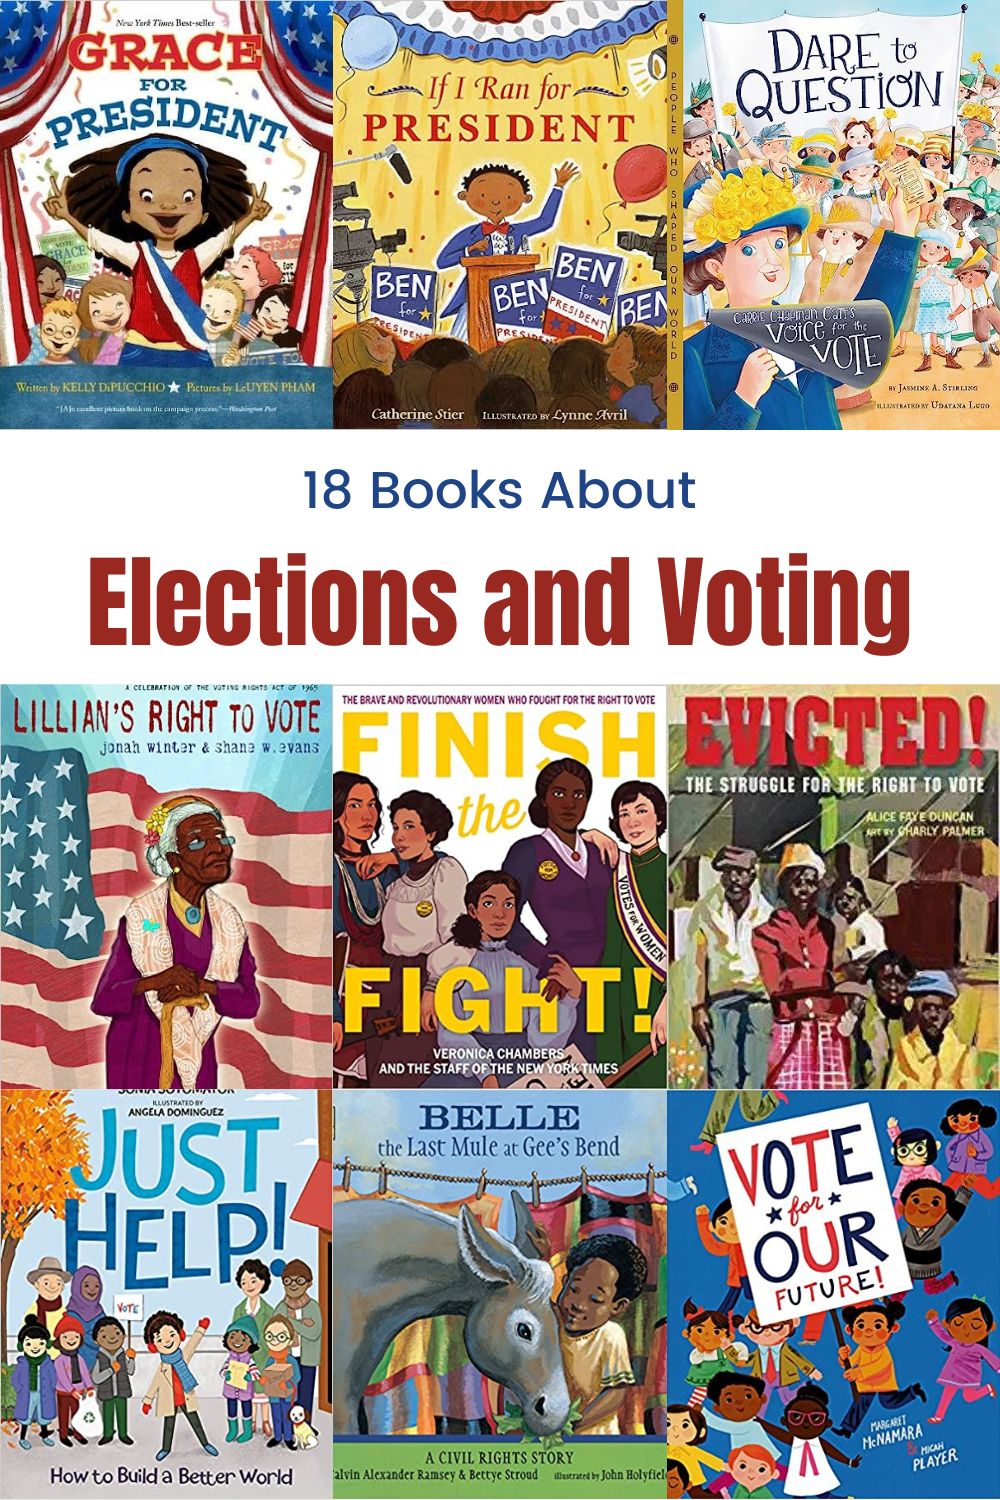 18 Children's Books About Elections and Voting